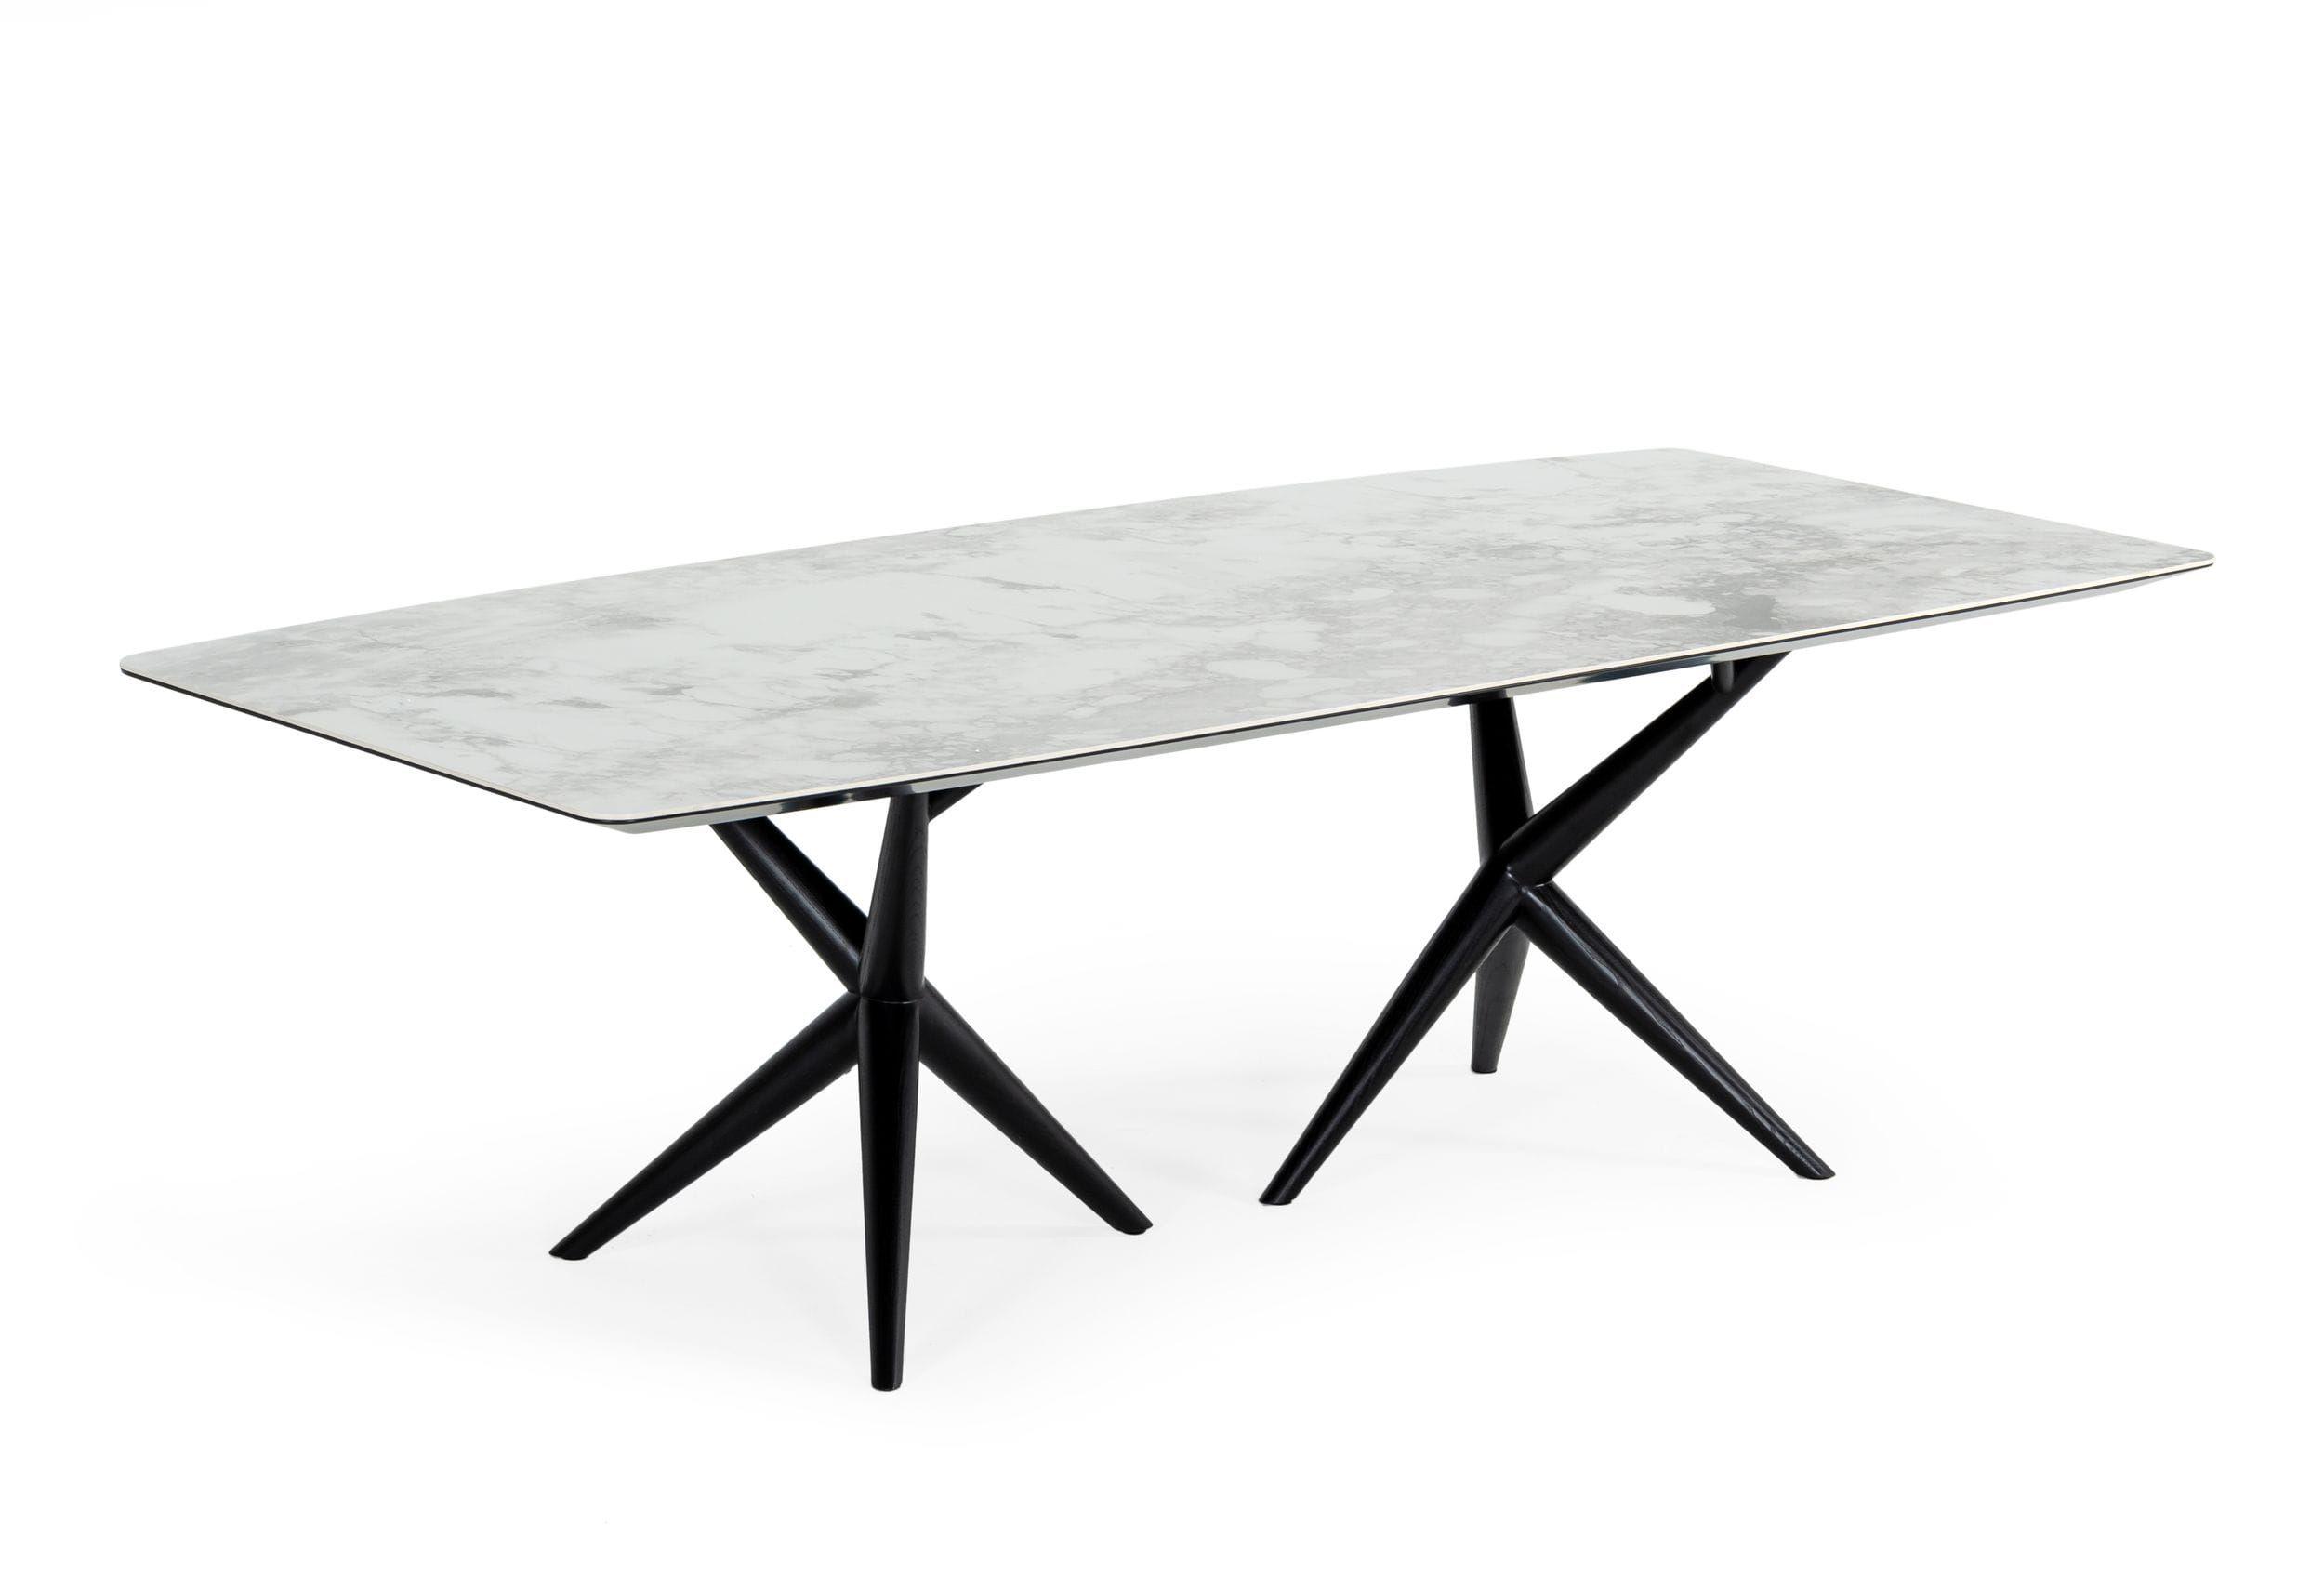 Contemporary, Modern Dining Table Stetson VGCSDT-20046-WHT-DT in White, Black 